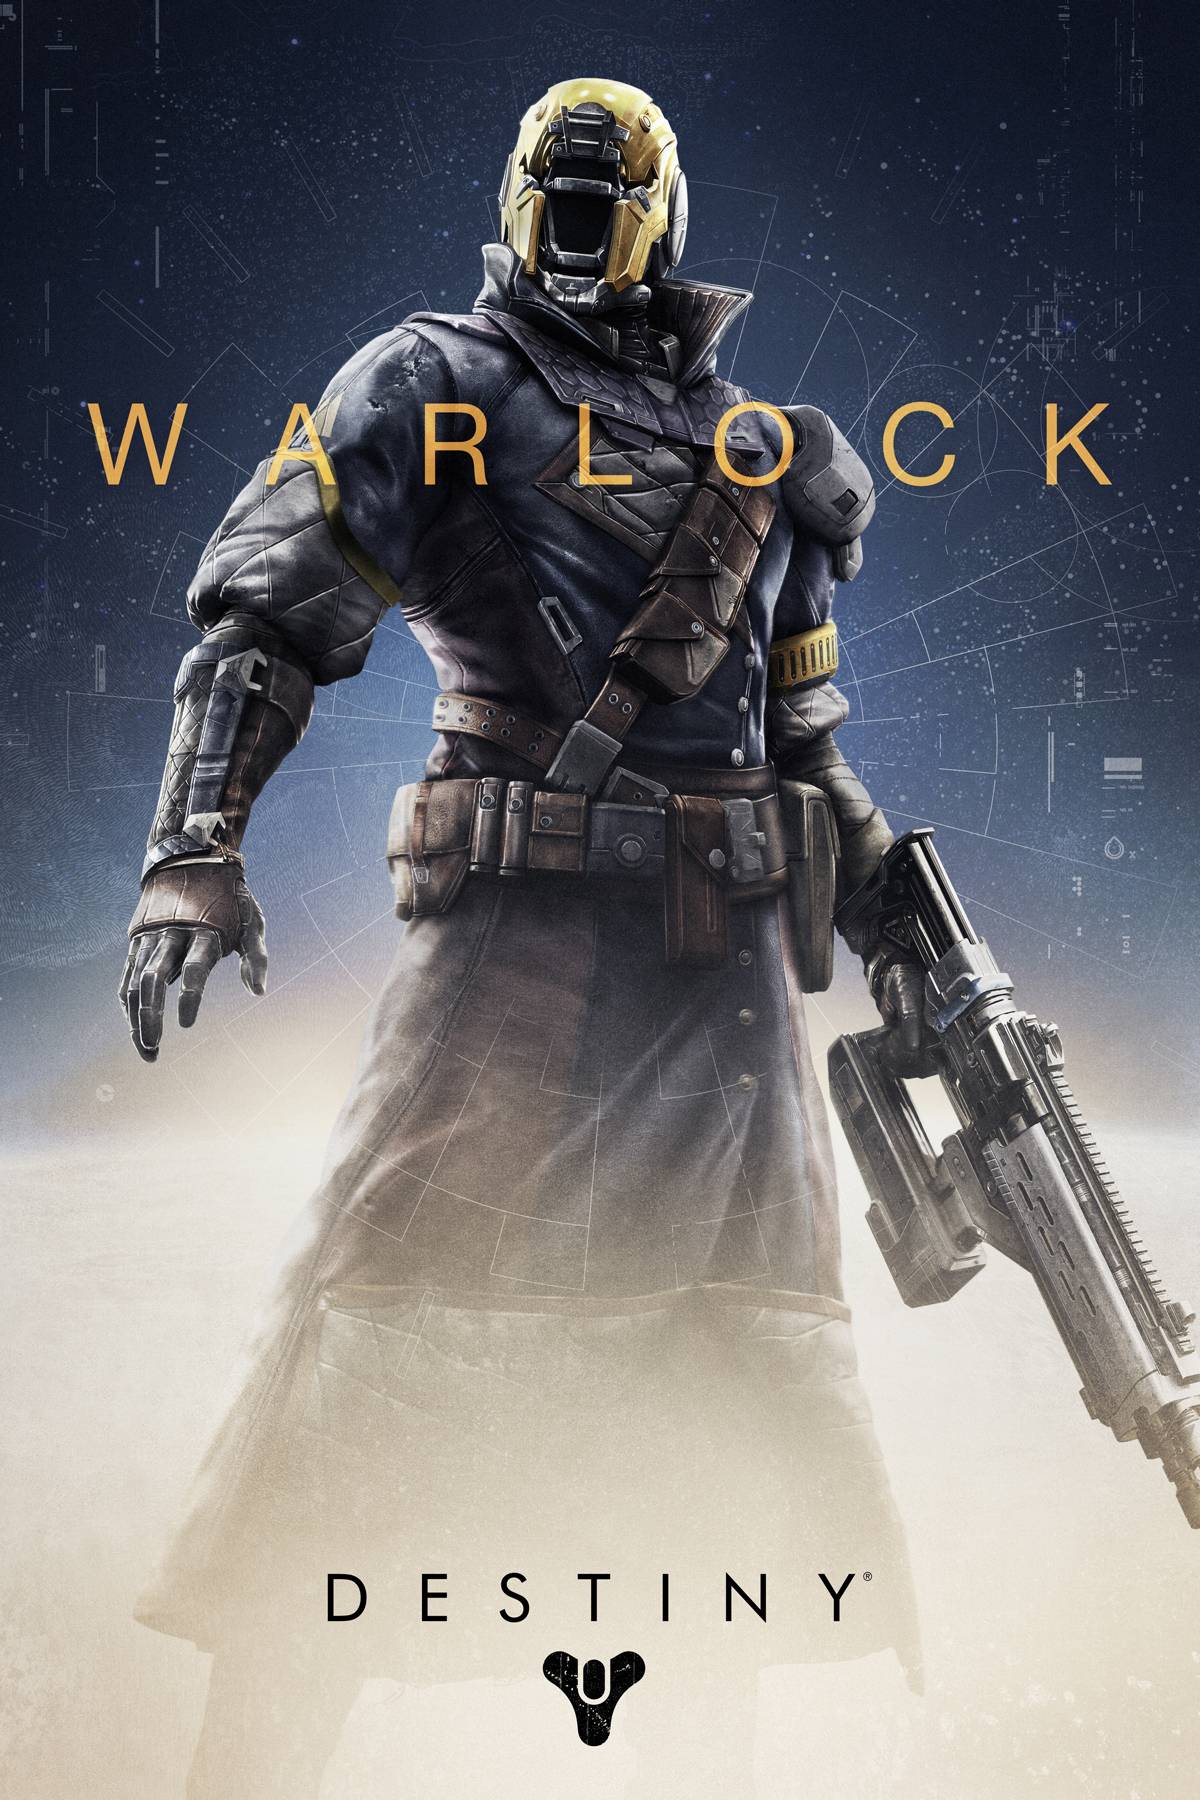 Awesome iPhone Android Destiny Wallpaper Warlock Destinythegame